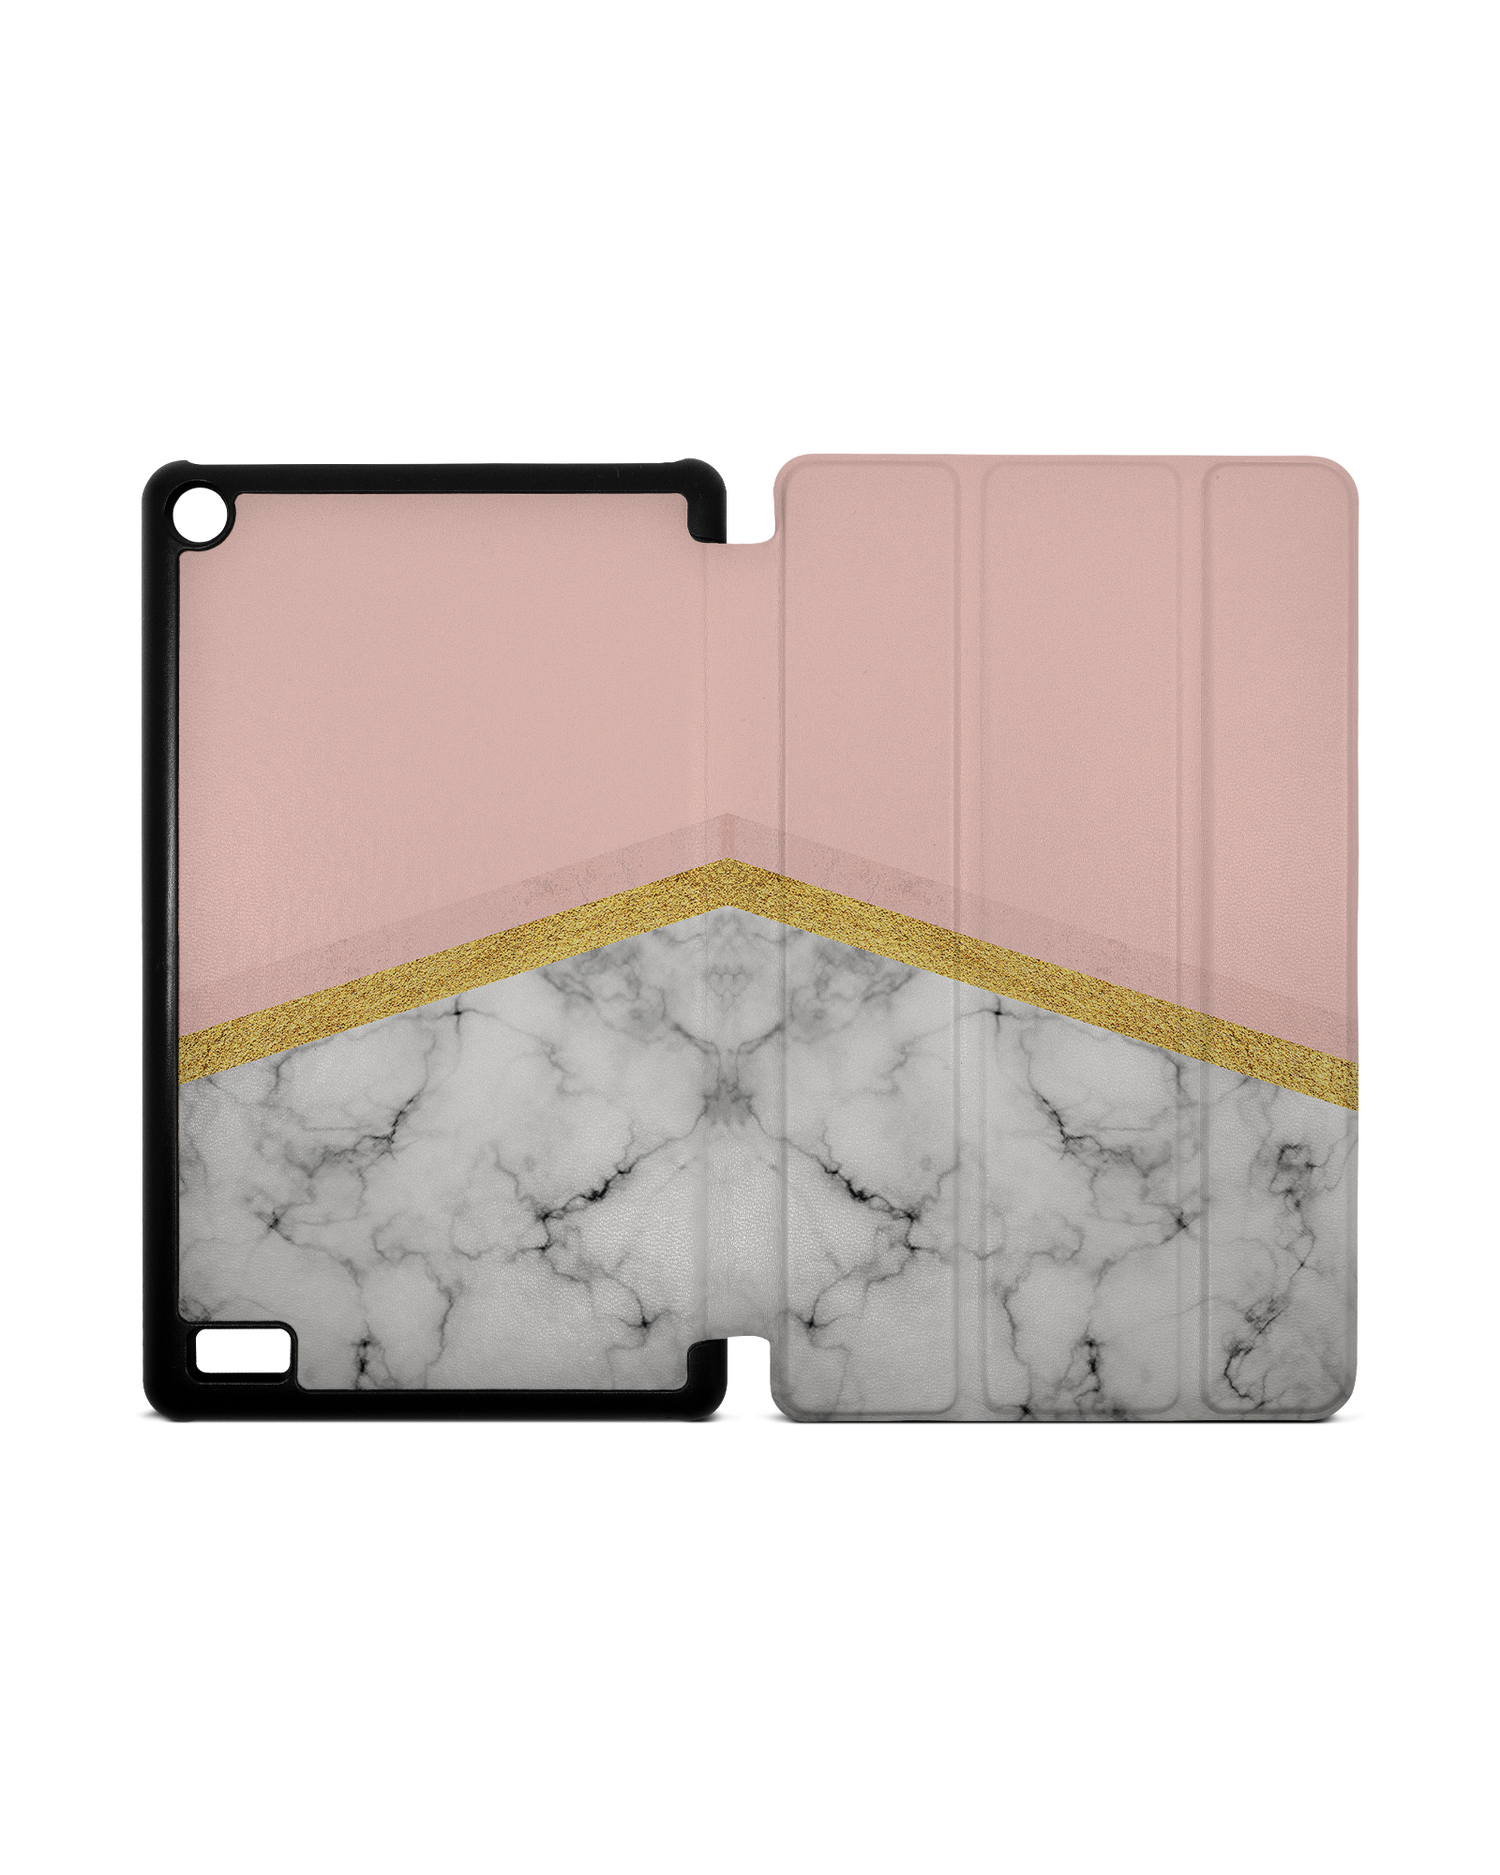 Marble Slice Tablet Smart Case for Amazon Fire 7: Opened